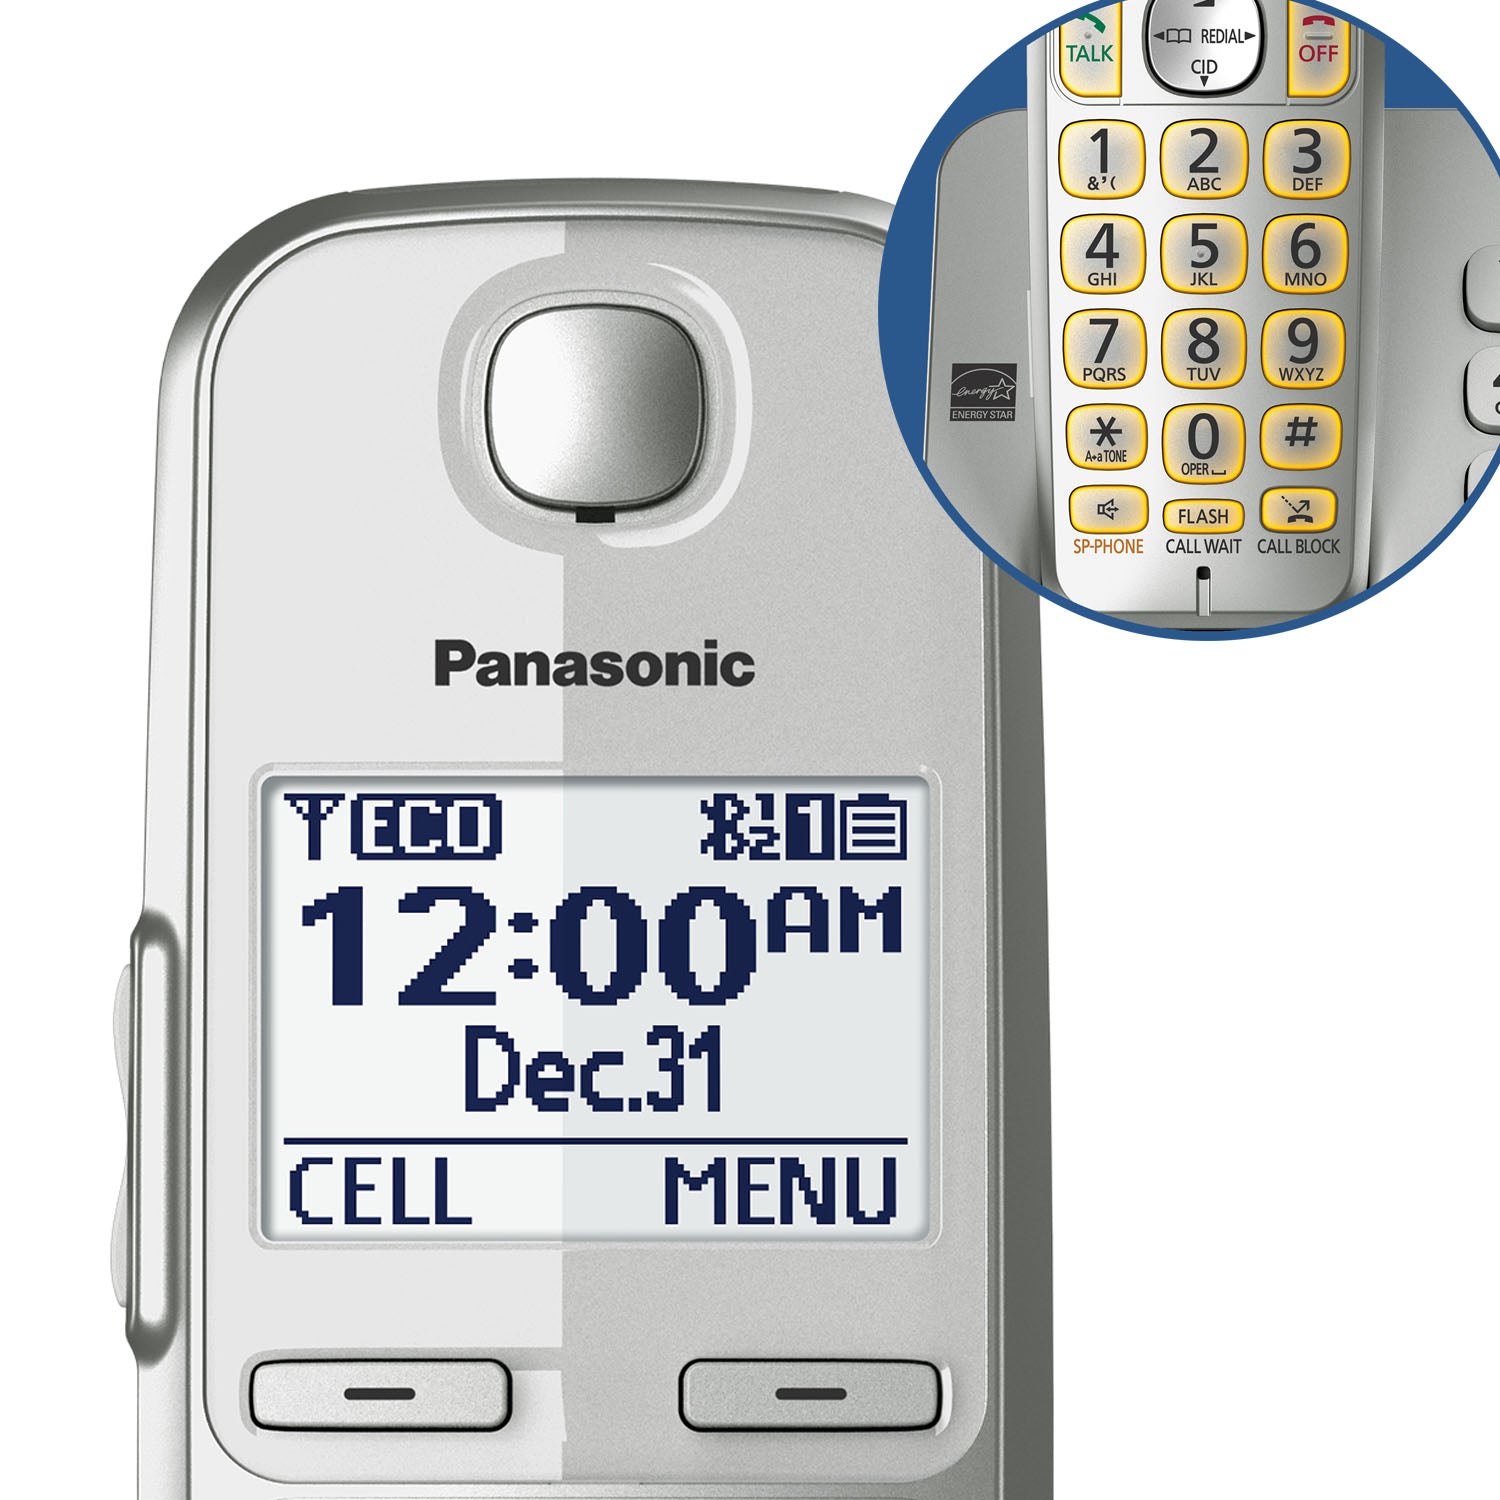 Panasonic 4 Handset Cordless Telephone System with Dual Keypad and  Integrated Answering Machine